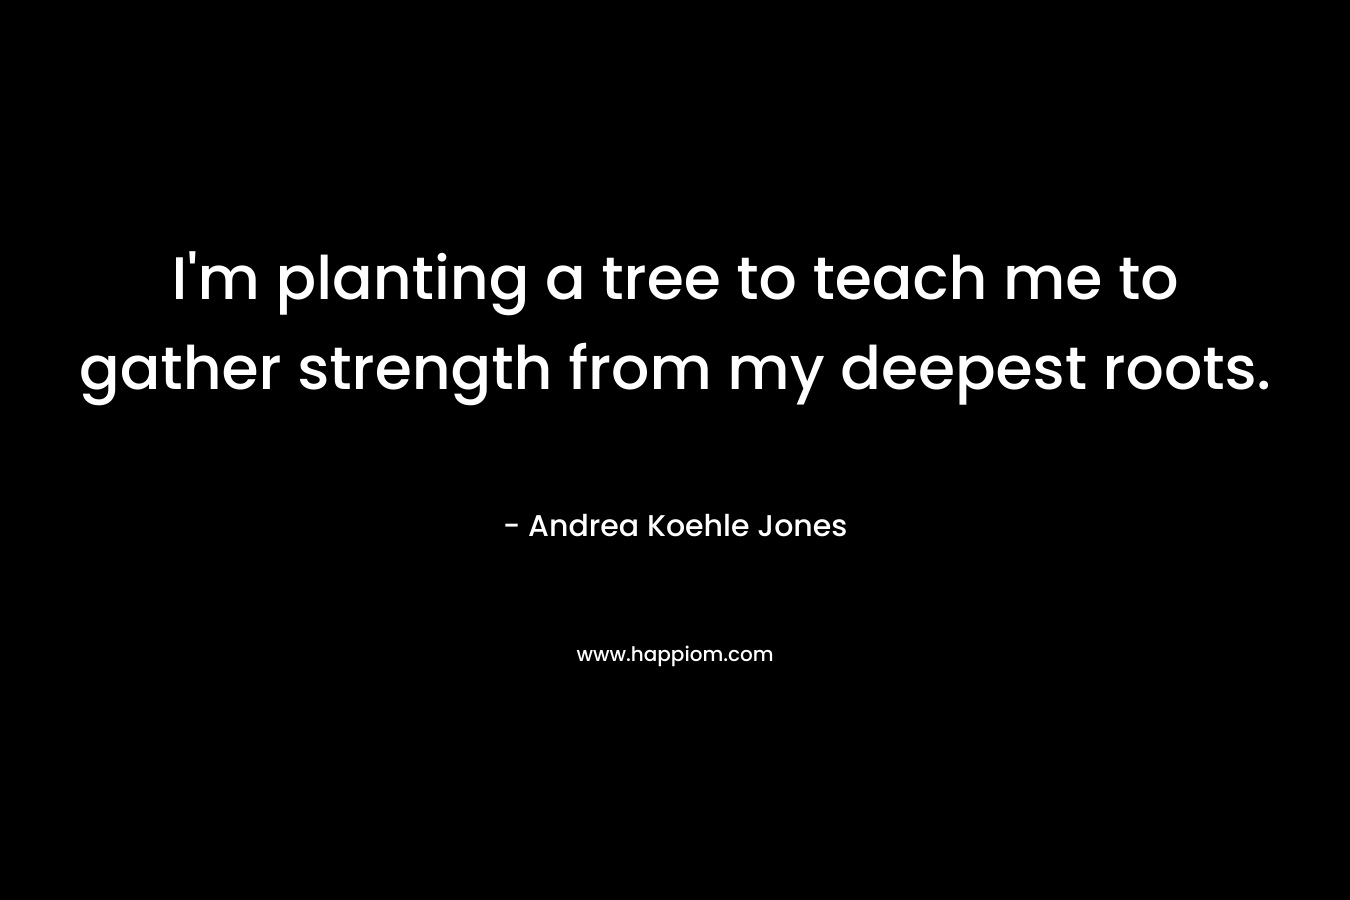 I’m planting a tree to teach me to gather strength from my deepest roots. – Andrea Koehle Jones